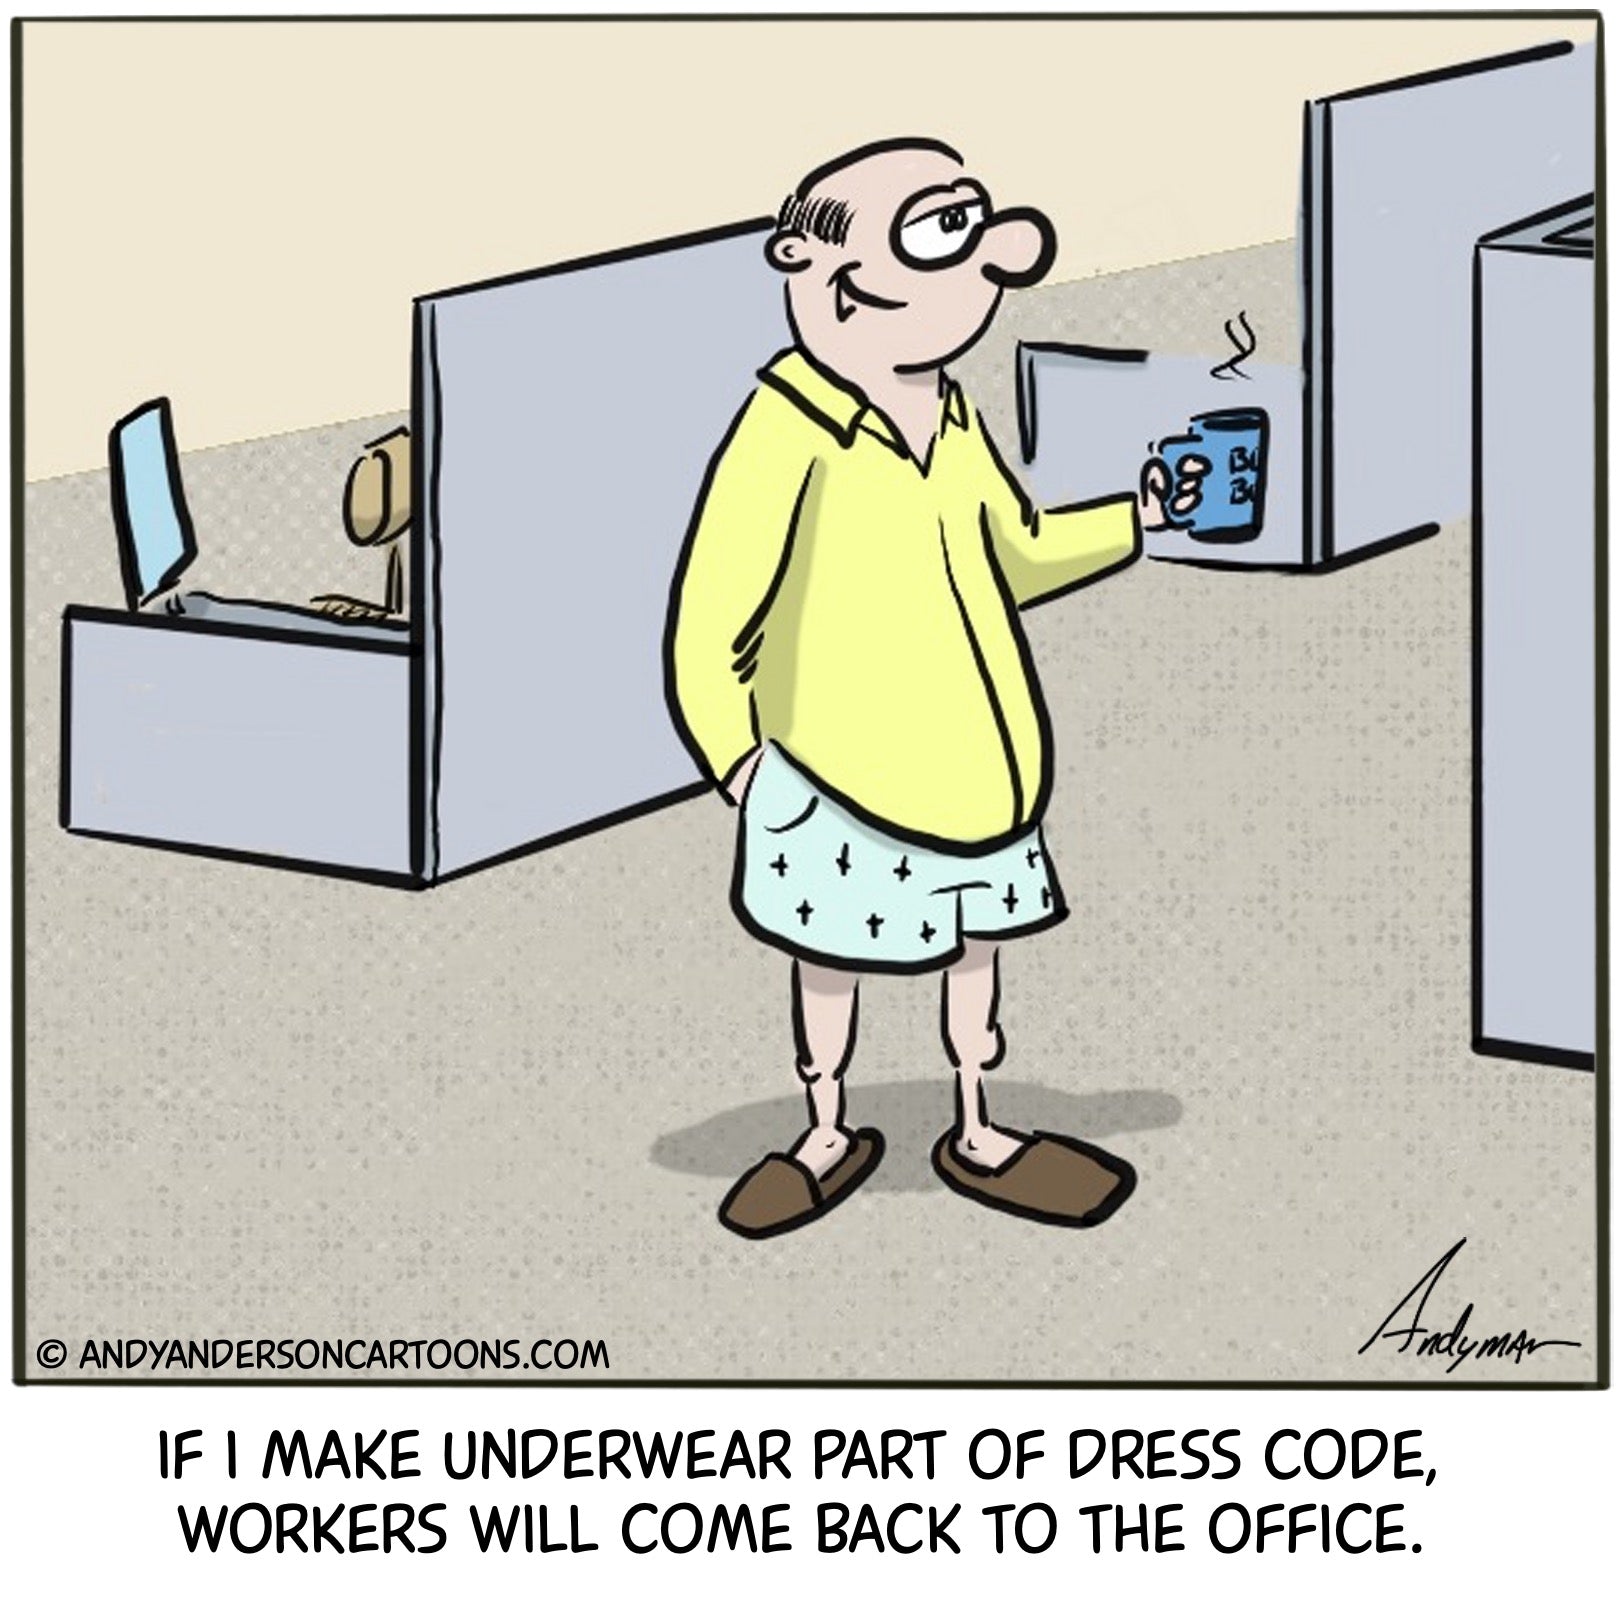 Cartoon/Meme about working in your underwear – Andy Anderson Cartoons